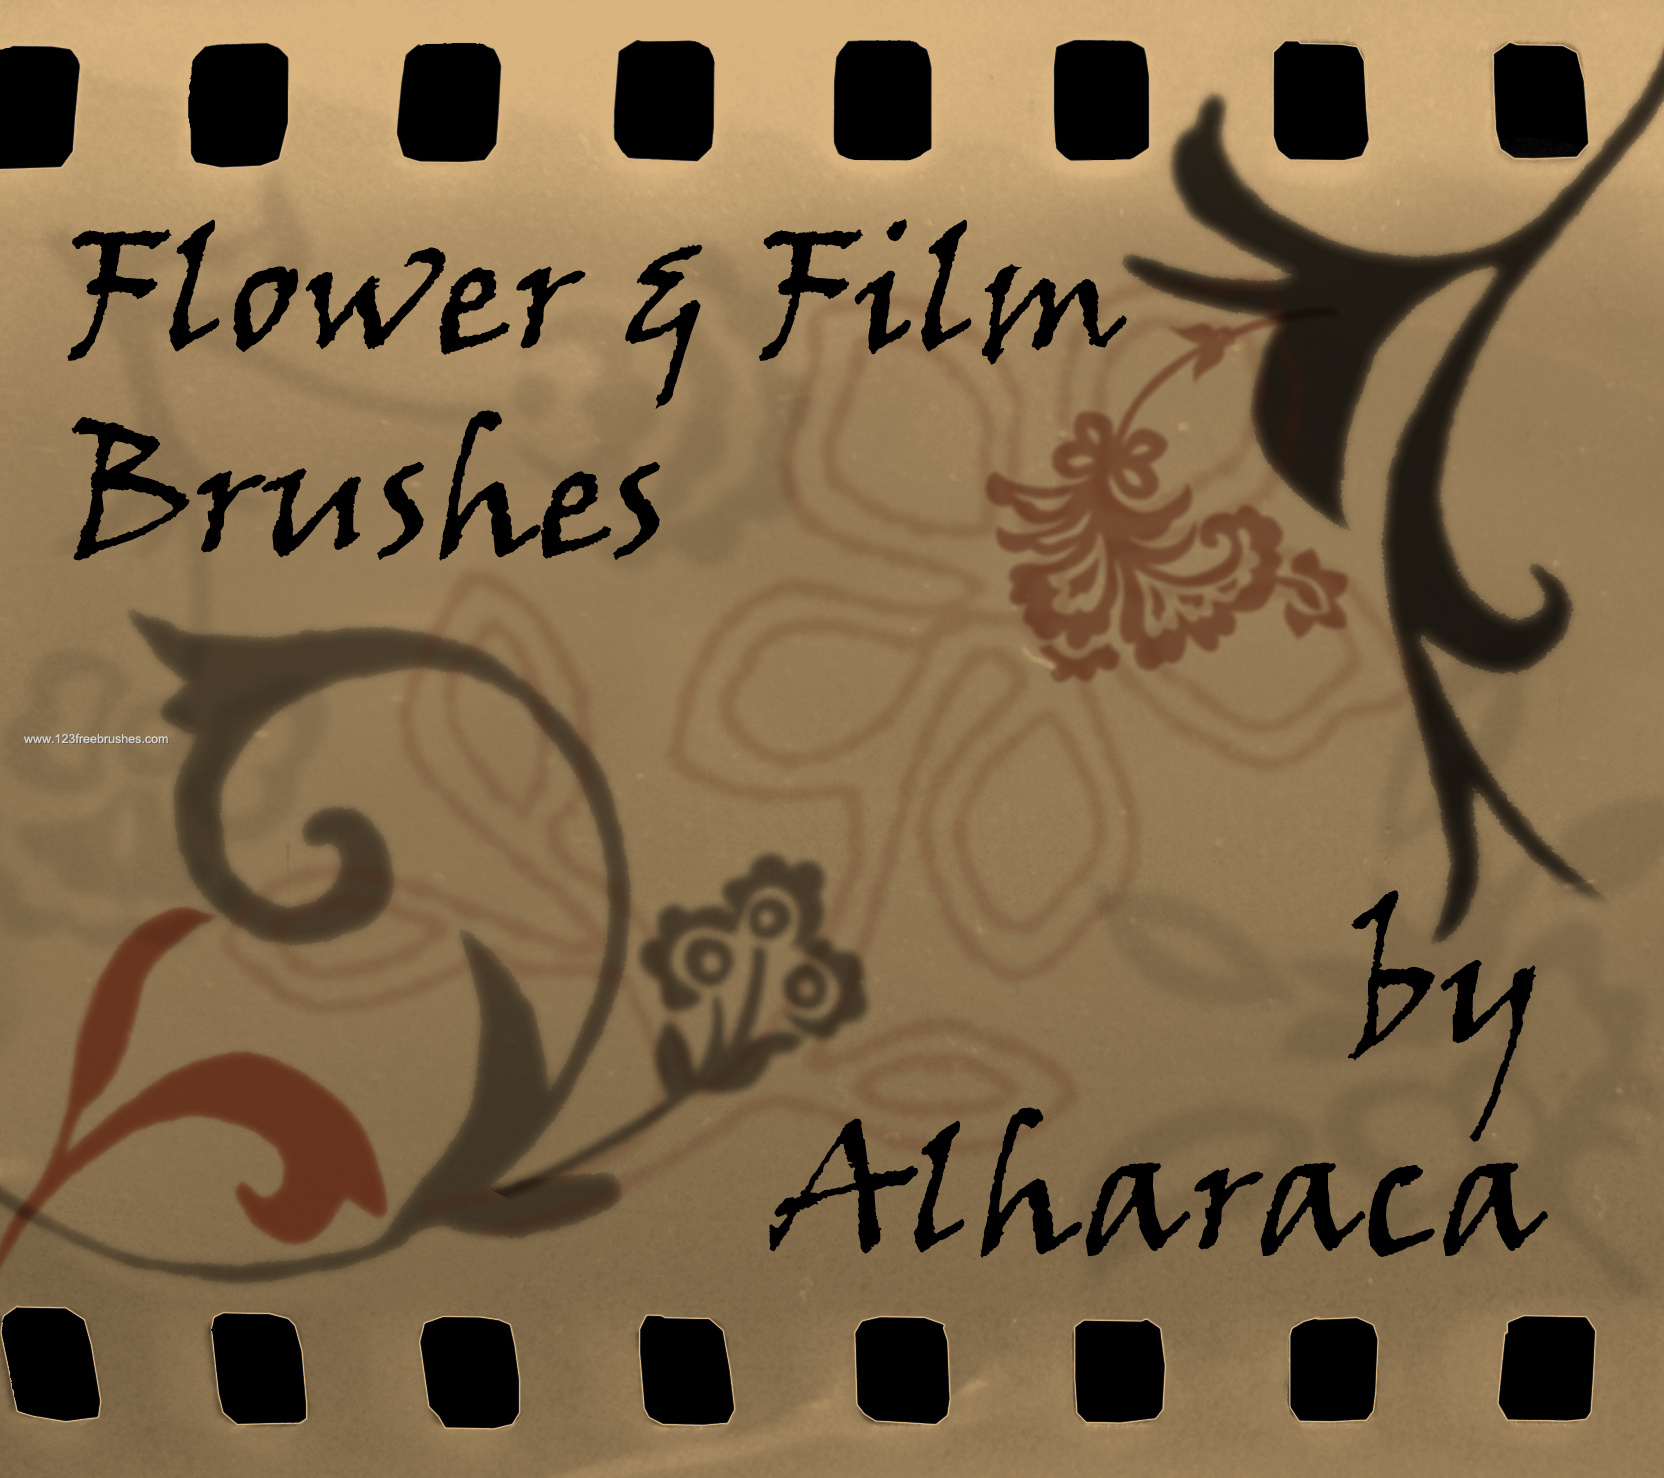 Flower and Film